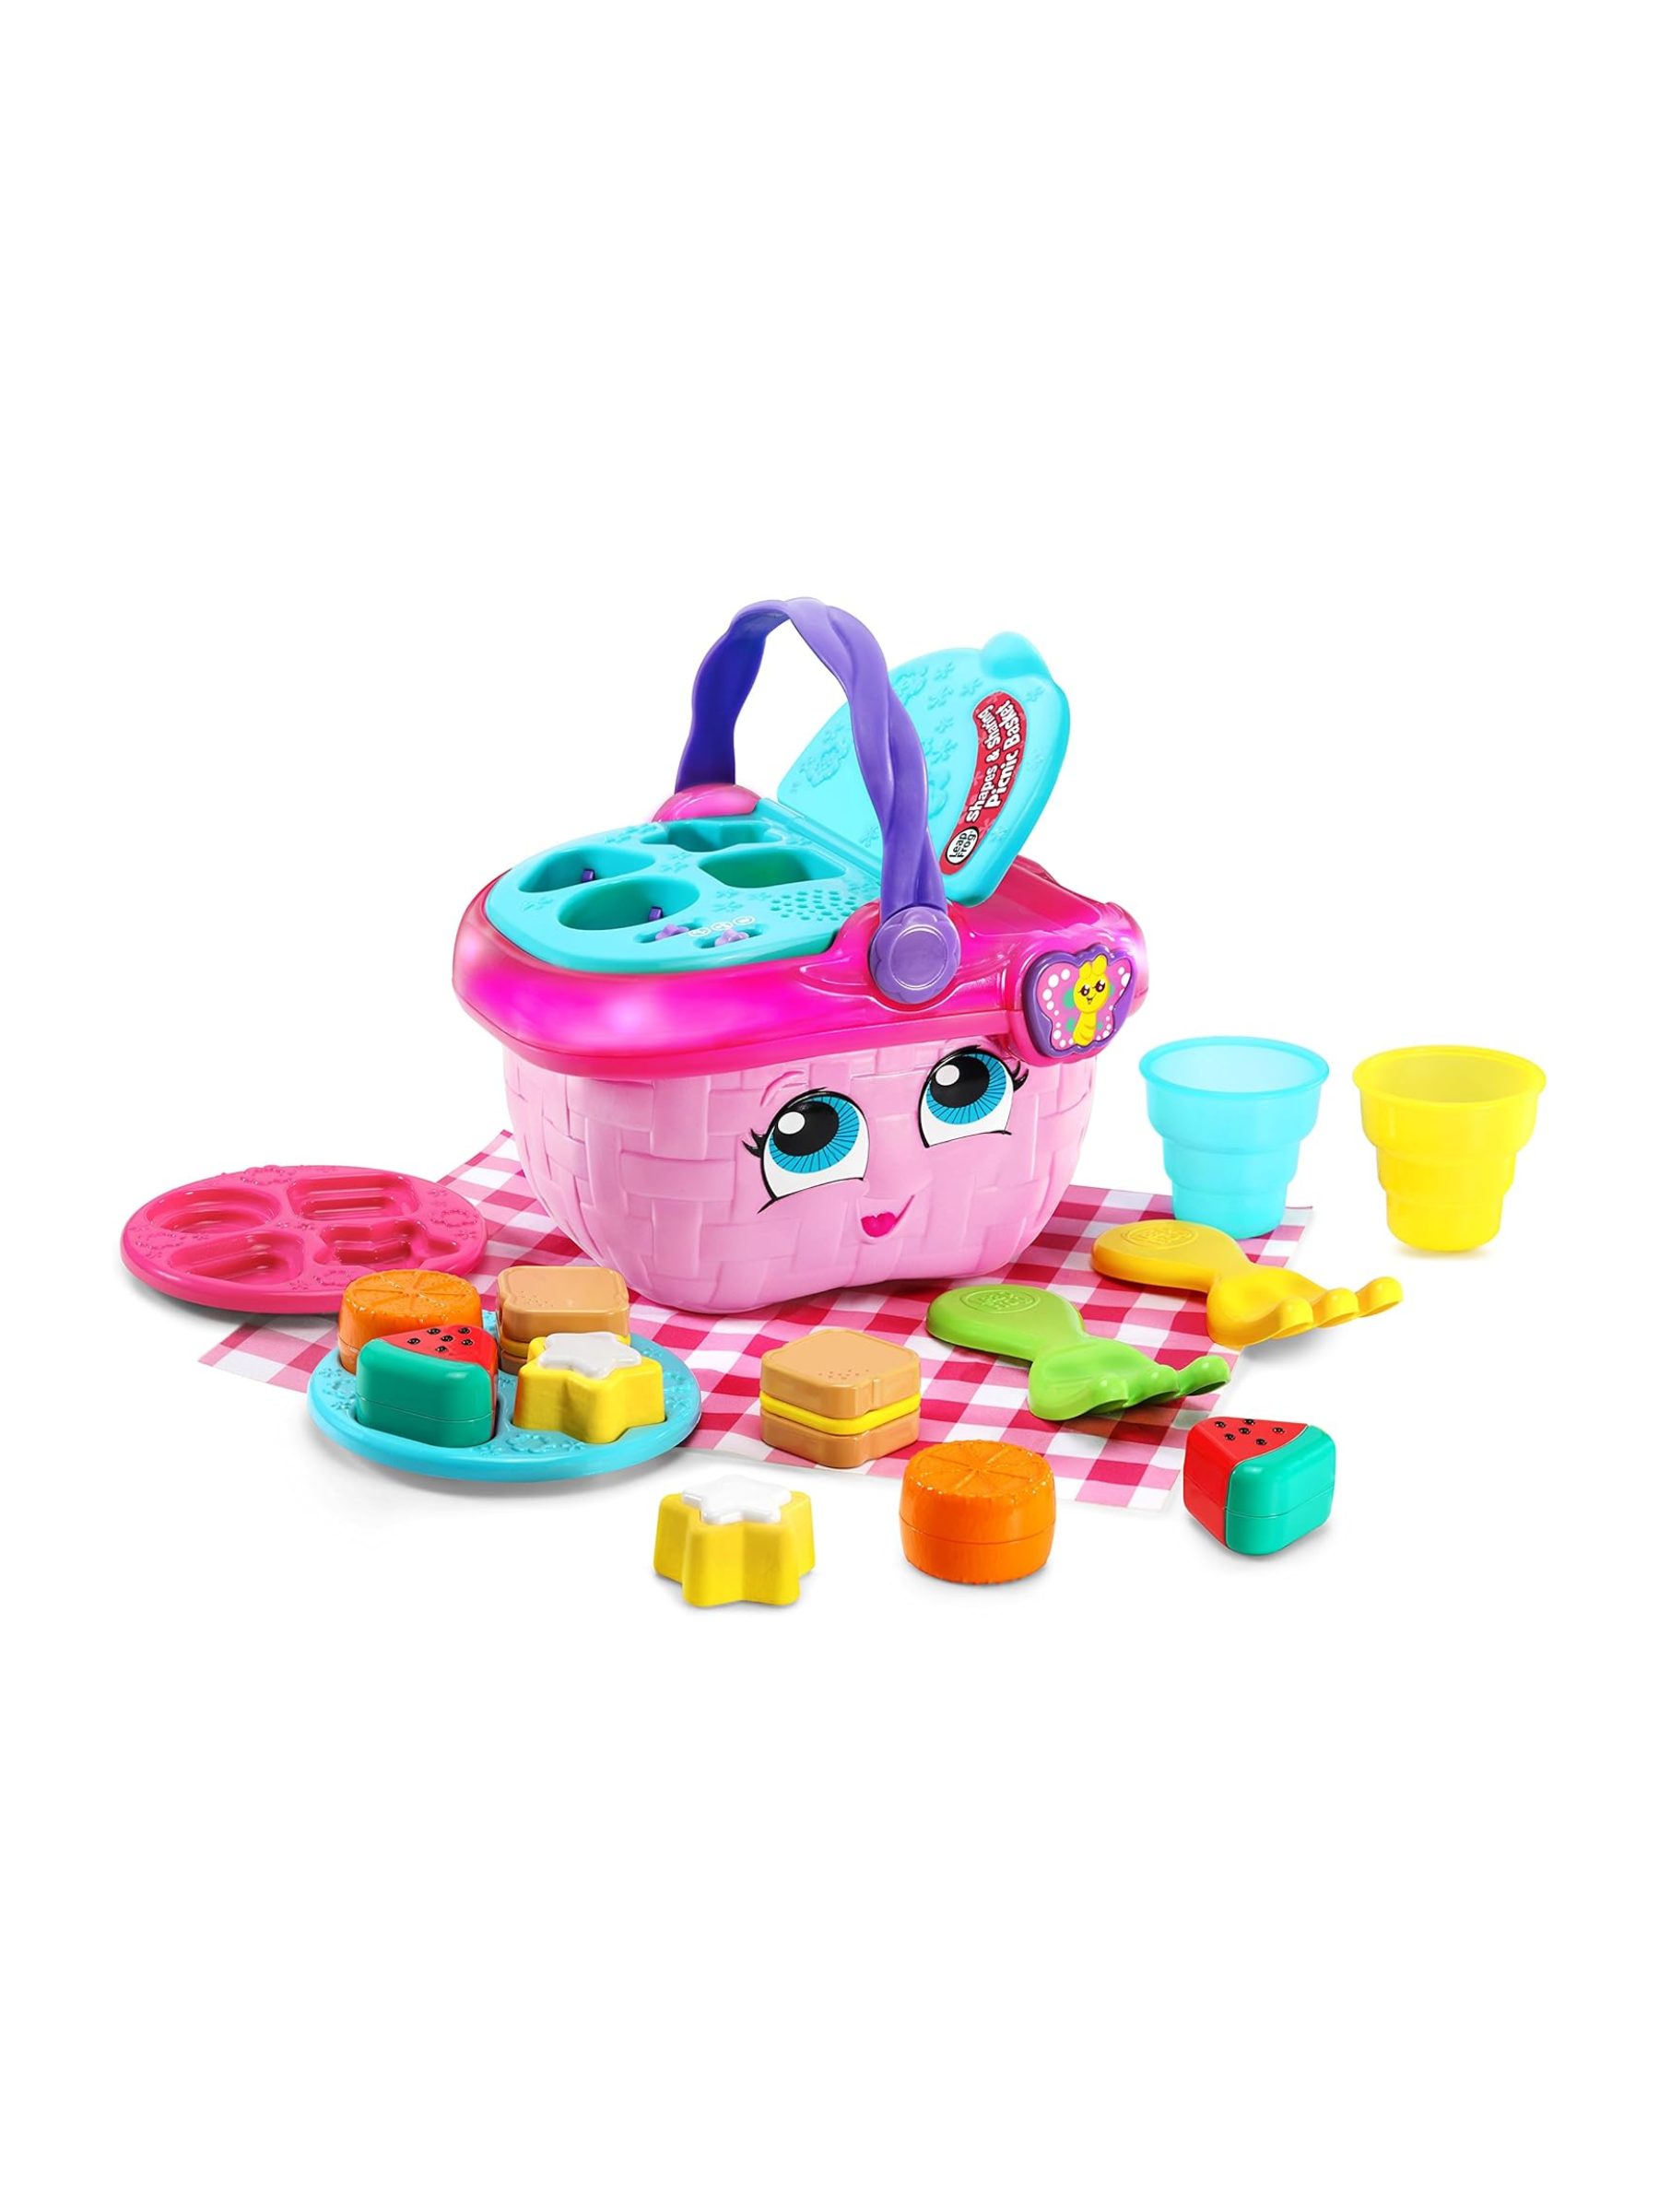 <p>There’s nothing toddlers love more than taking an object out of a container and putting it in another container. But with this picnic basket from LeapFrog, they are learning about different foods, shapes, and colors while doing their beloved sorting.</p> <p><strong>What our expert says:</strong> This is another toy that comes highly recommended from a close friend, who raves about its ability to keep her daughter's attention. Plus, who doesn't like a pretend picnic? <em>-SM</em></p> $25, Amazon. <a href="https://www.amazon.com/dp/B07C5CVLYL?">Get it now!</a><p>Sign up for today’s biggest stories, from pop culture to politics.</p><a href="https://www.glamour.com/newsletter/news?sourceCode=msnsend">Sign Up</a>